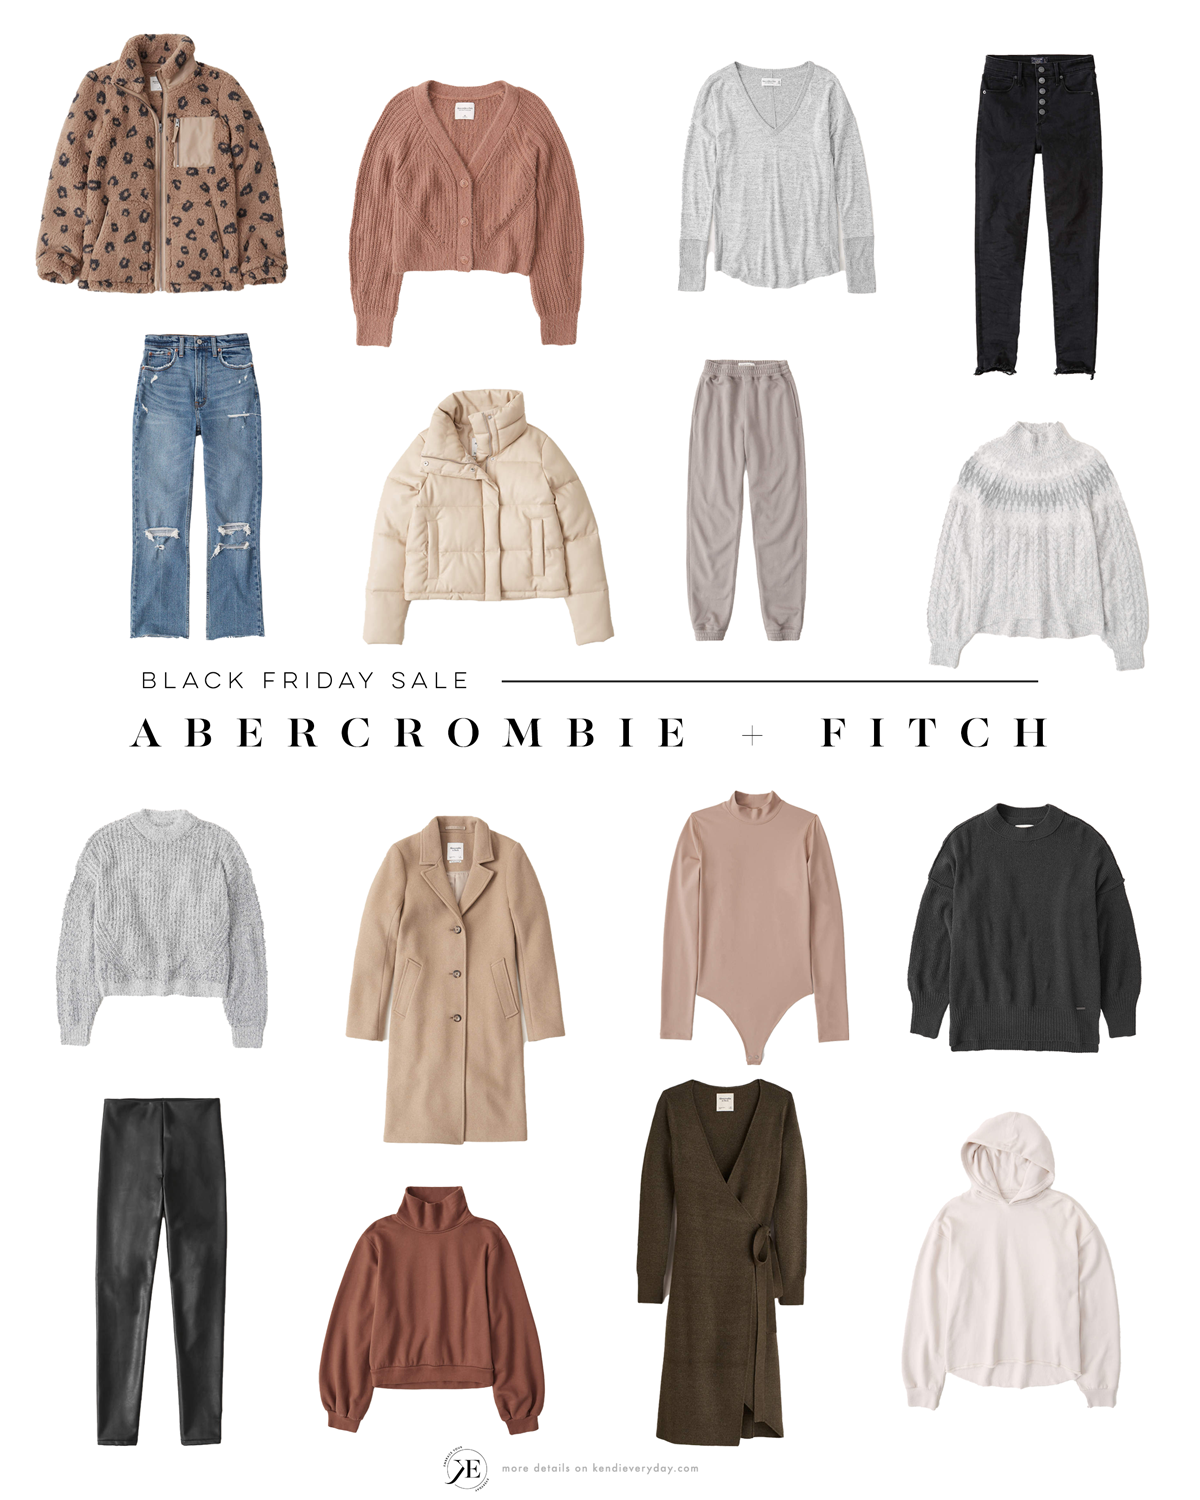 Black Friday Sales: Abercrombie & Fitch | Kendi Everyday - What Kind Of Sales For Abercrombie For Black Friday